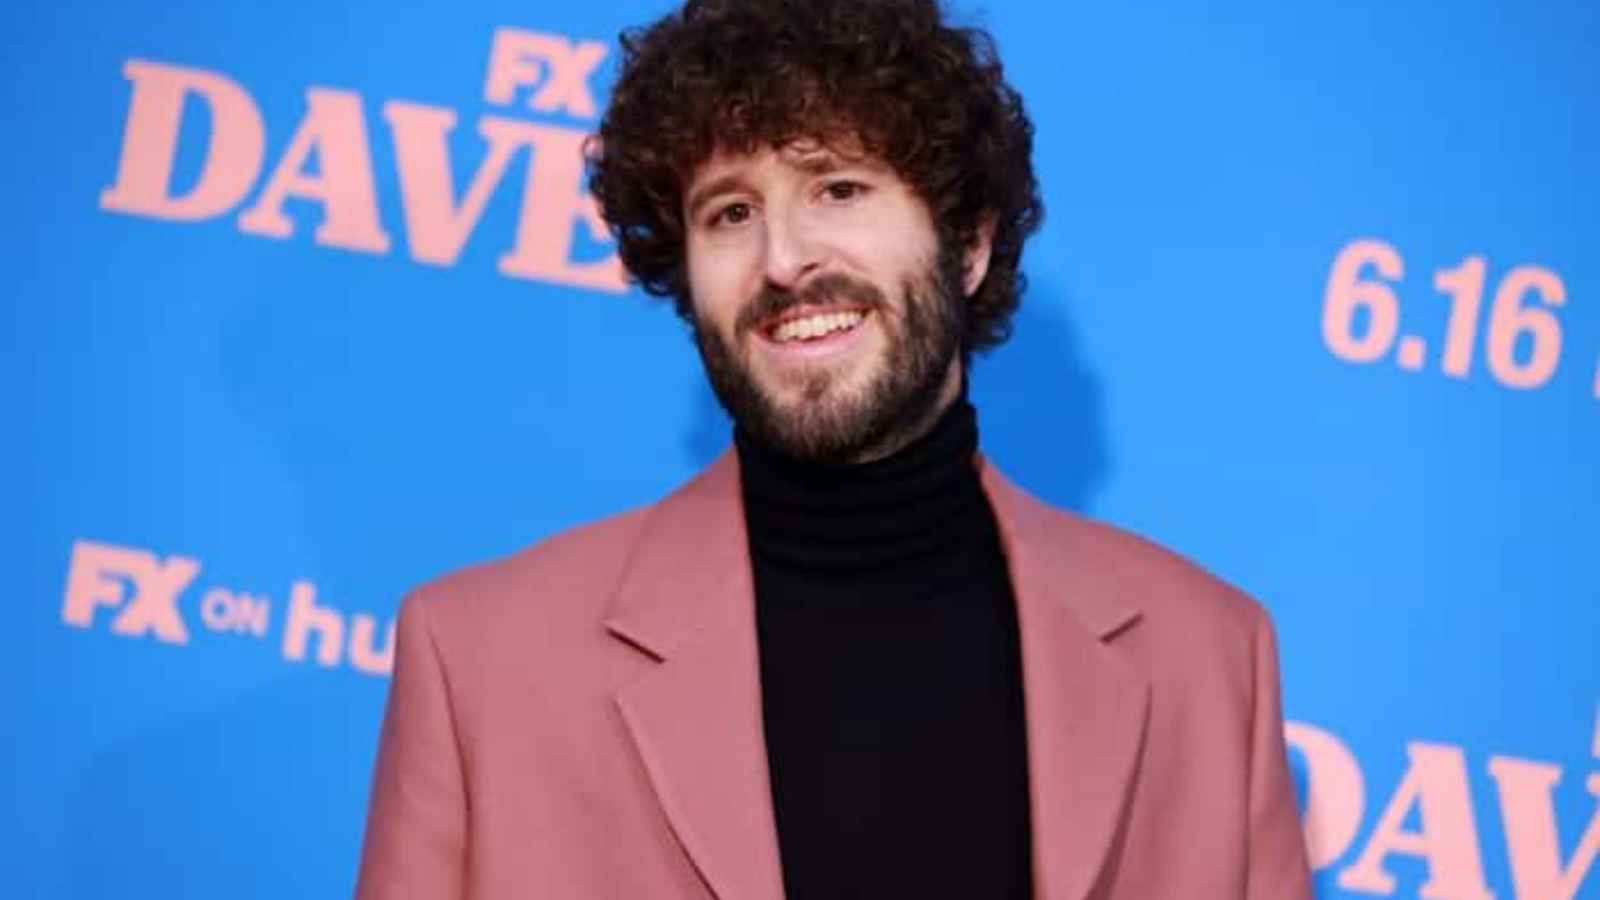 Lil Dicky Girlfriend Kristin Is Into Production? Relationship Timeline